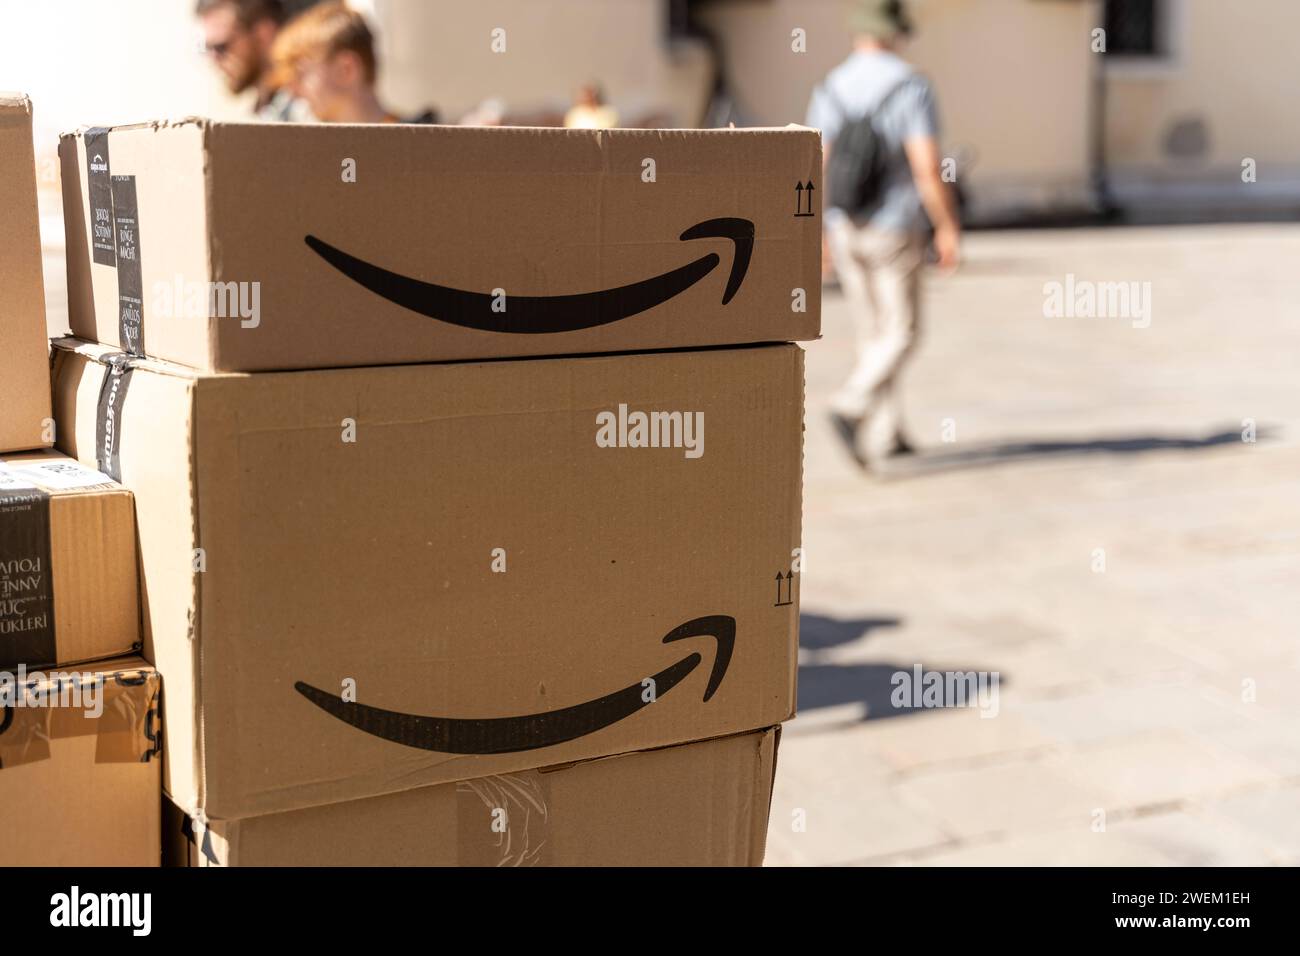 Venice, Italy - September 12, 2022: stacked parcels from a letter carrier in downtown Venice, Italy. Numerous Amazon parcels *** gestapelte Pakete von einem Postboten in Venedig, Italien in der Innenstadt. Zahlreiche Amazon Pakete Stock Photo